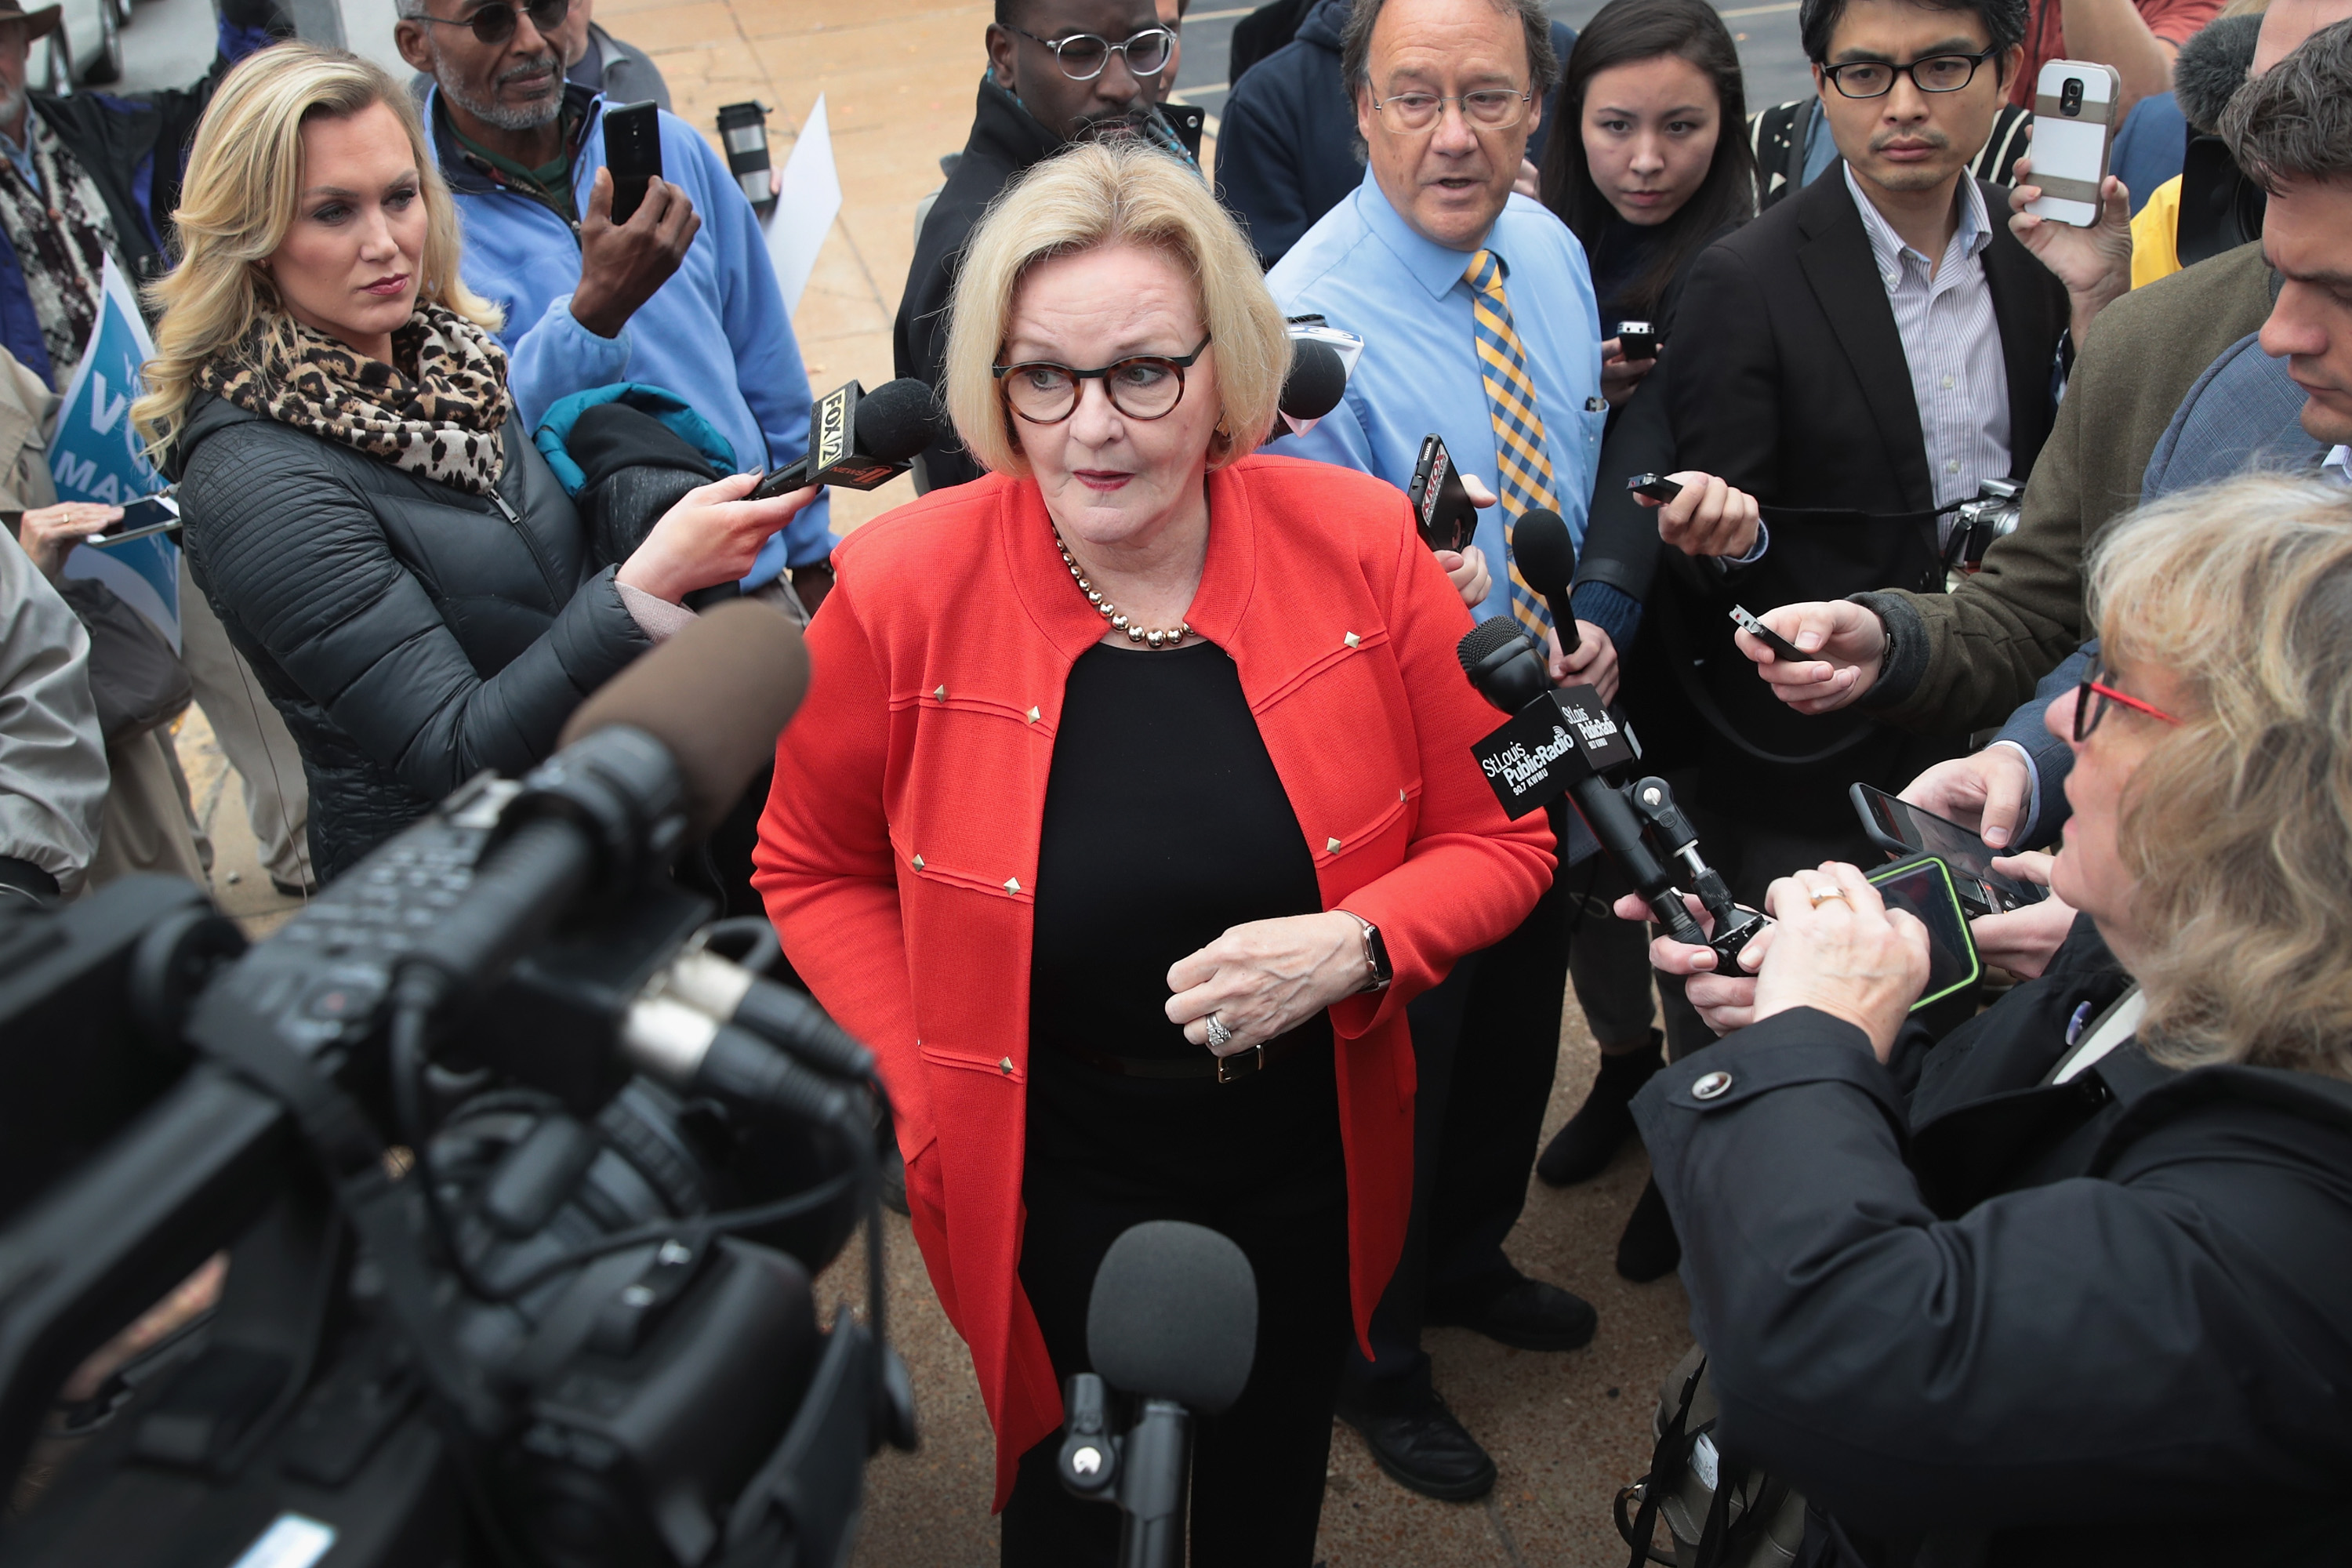 Senator Claire McCaskill fields questions from reporters following a campaign stop at The Royale bar on November 5, 2018 in St. Louis, Missouri. (Scott Olson/Getty Images)